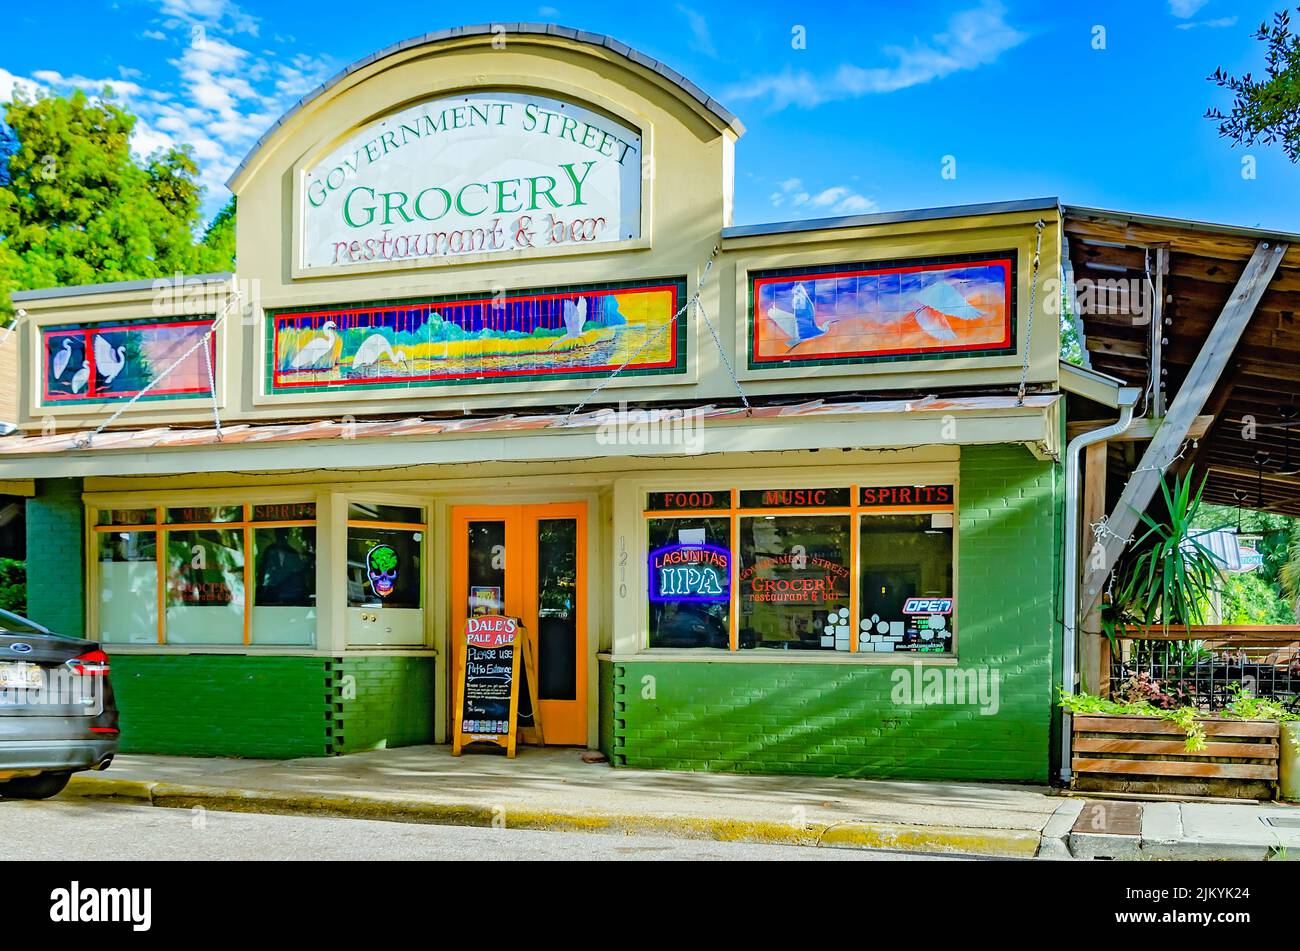 Government Street Grocery is pictured, July 31, 2022, in Ocean Springs, Mississippi. Stock Photo